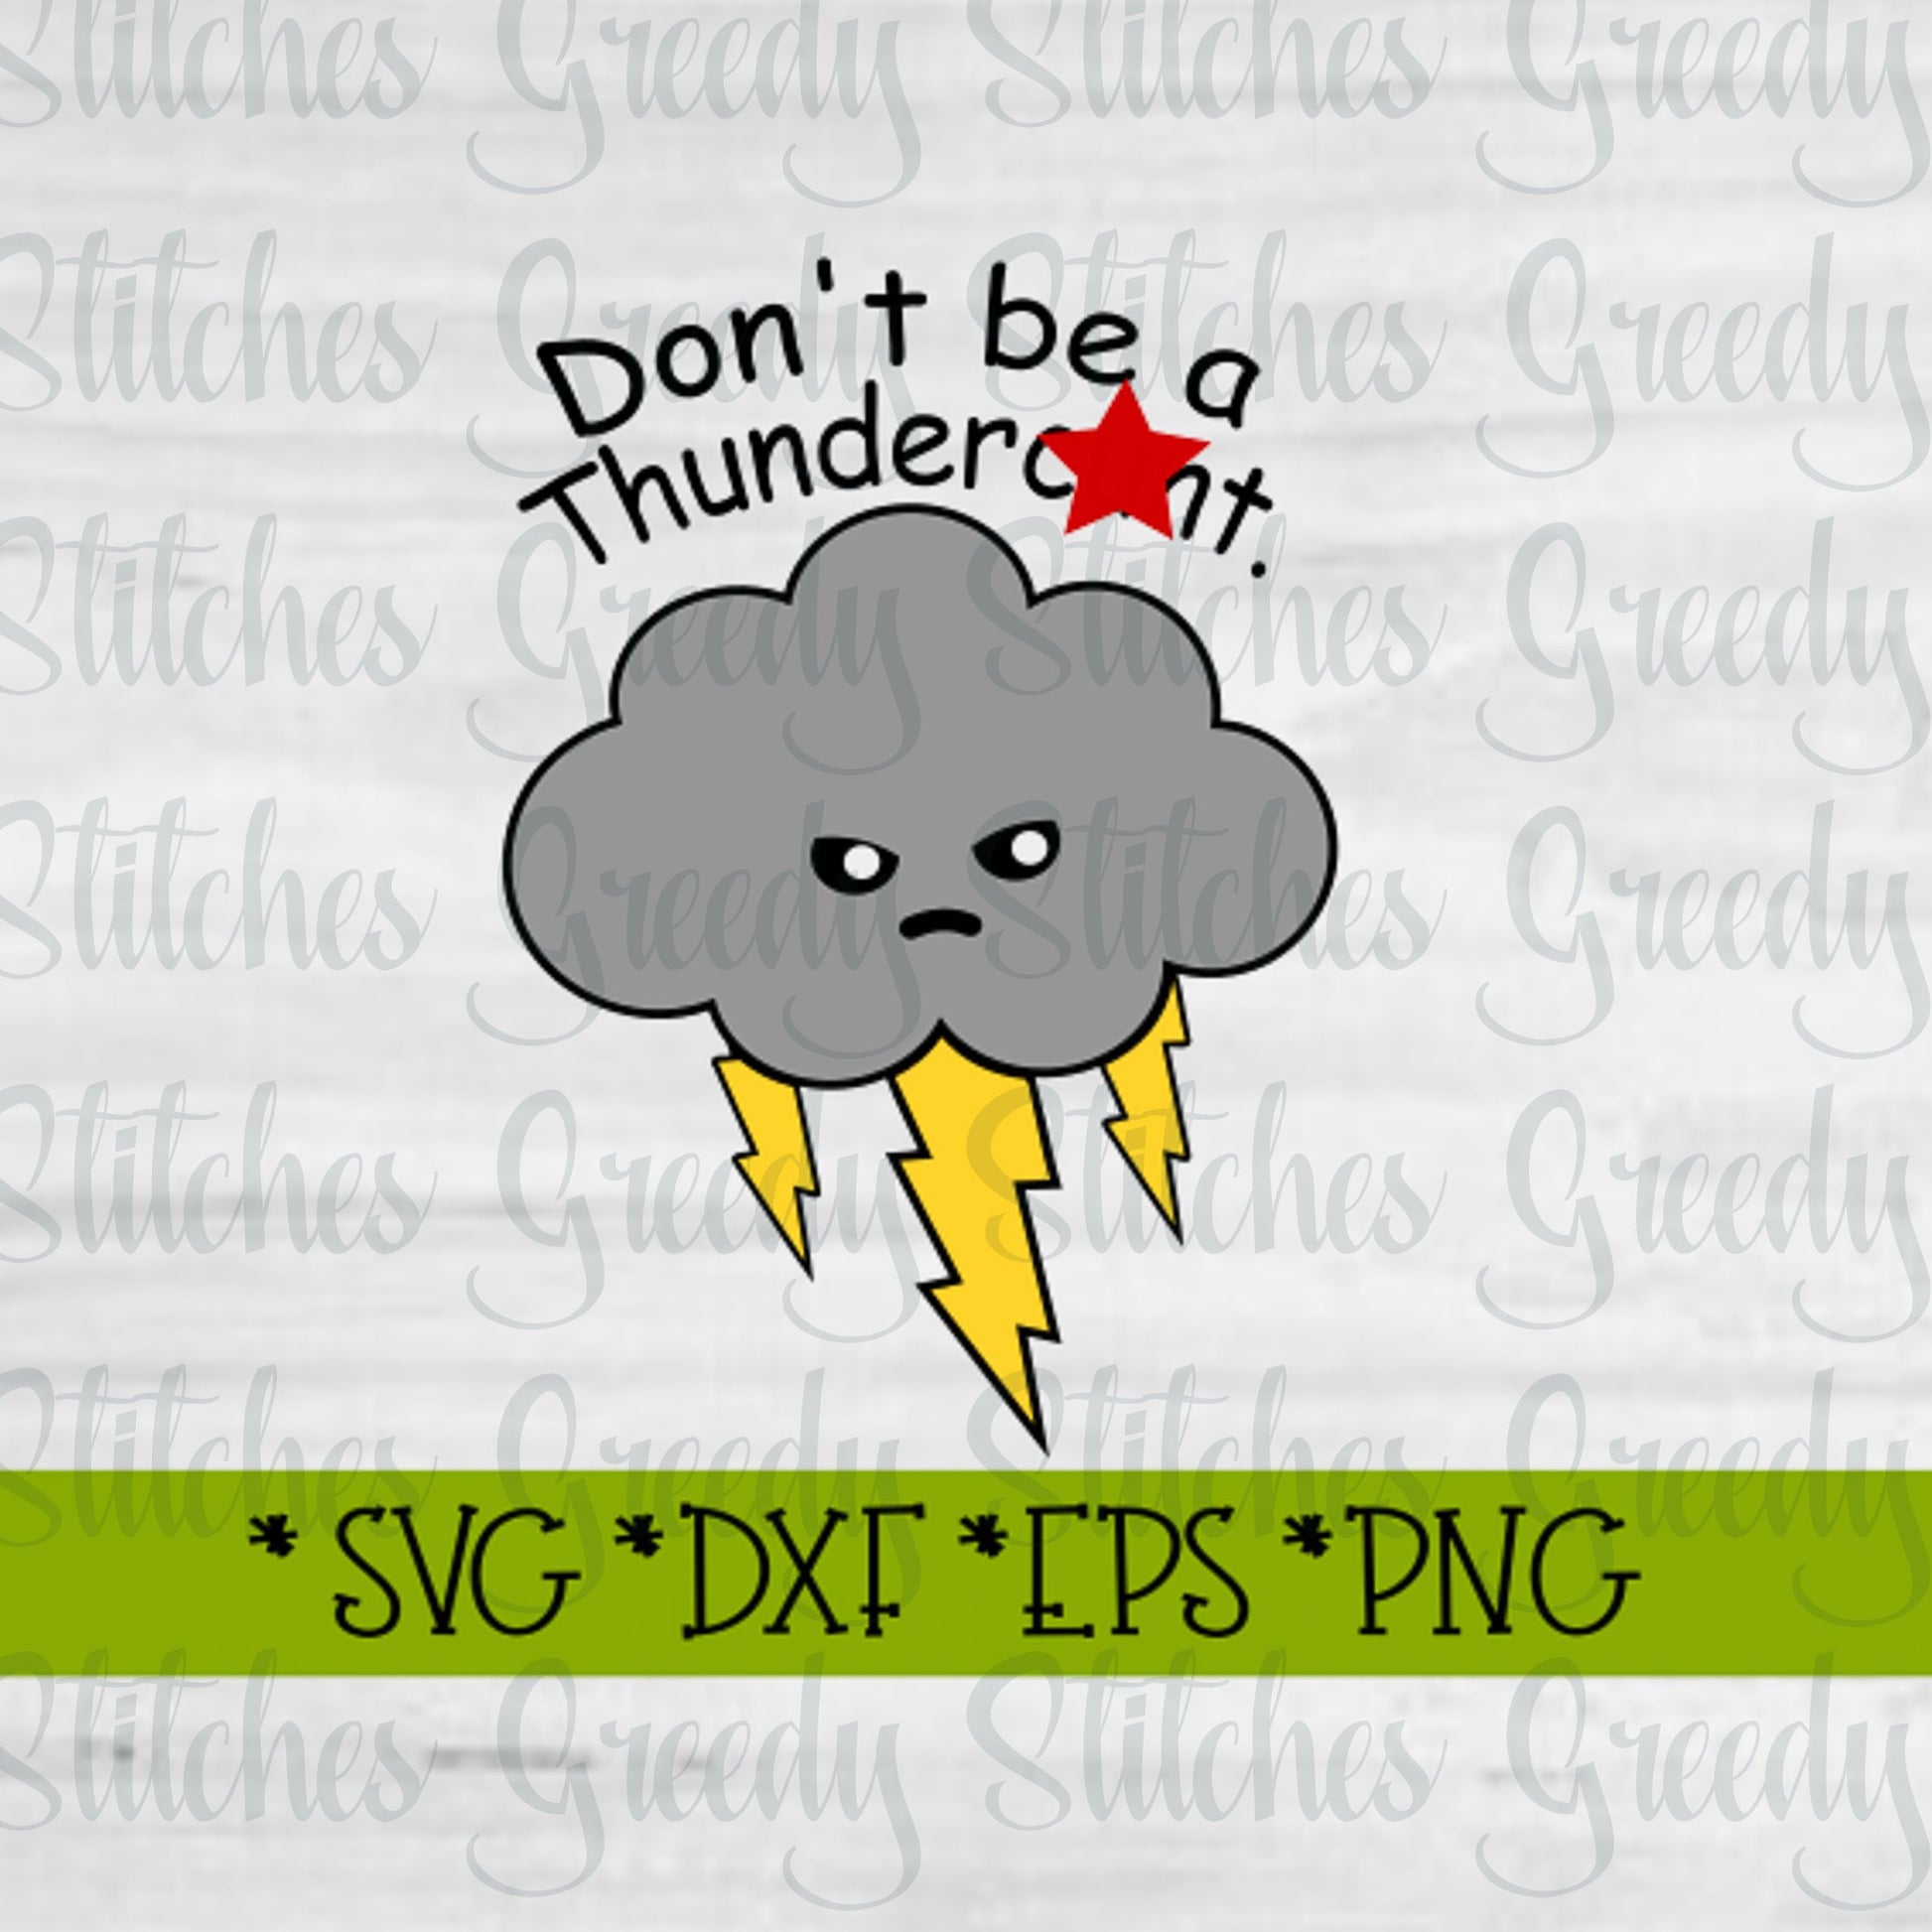 Don&#39;t Be A Thunderc*nt SvG, DxF, EpS, PnG, JpG.  Twat SvG | Thundercunt SvG | Funny SvG | Thundercunt SvG | Instant Download Cut Files.